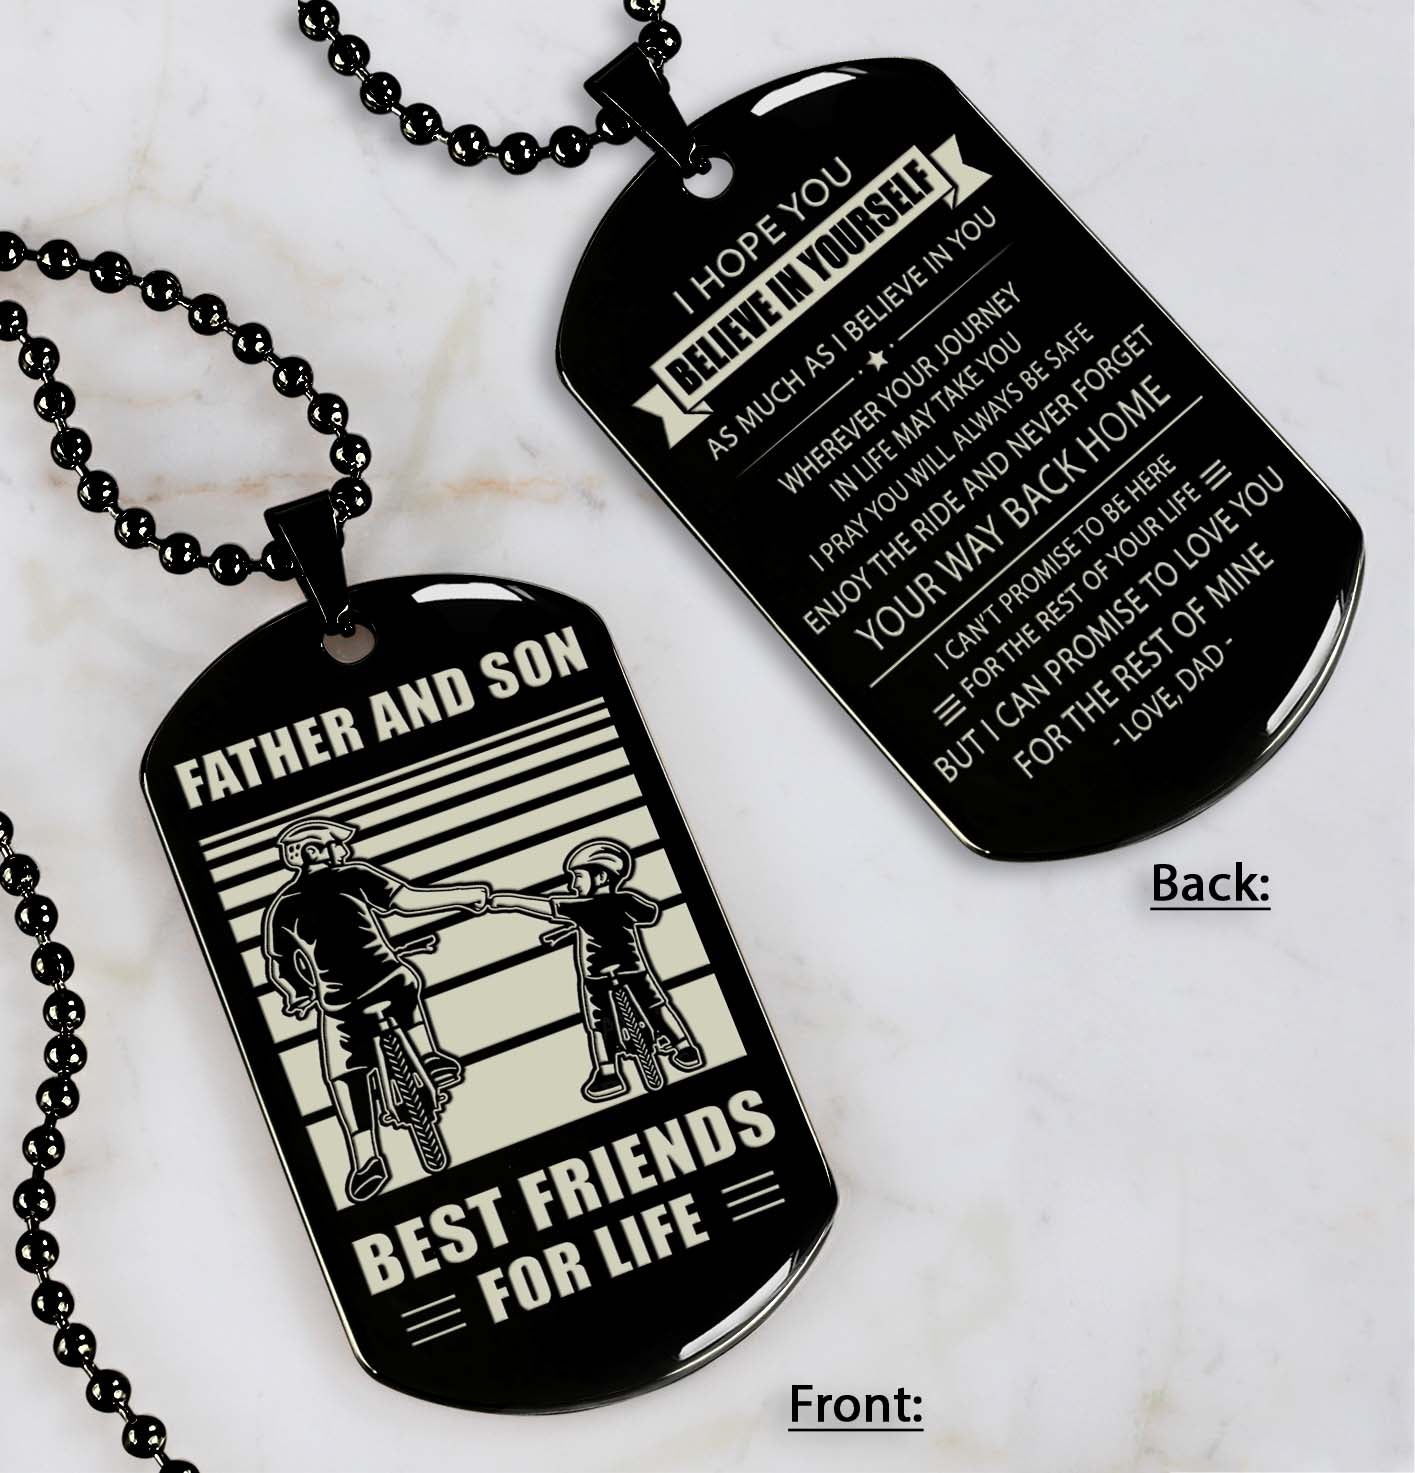 Bicycle customizable engraved double sided dog tag gifts from dad mom to son father and son Best friend for life